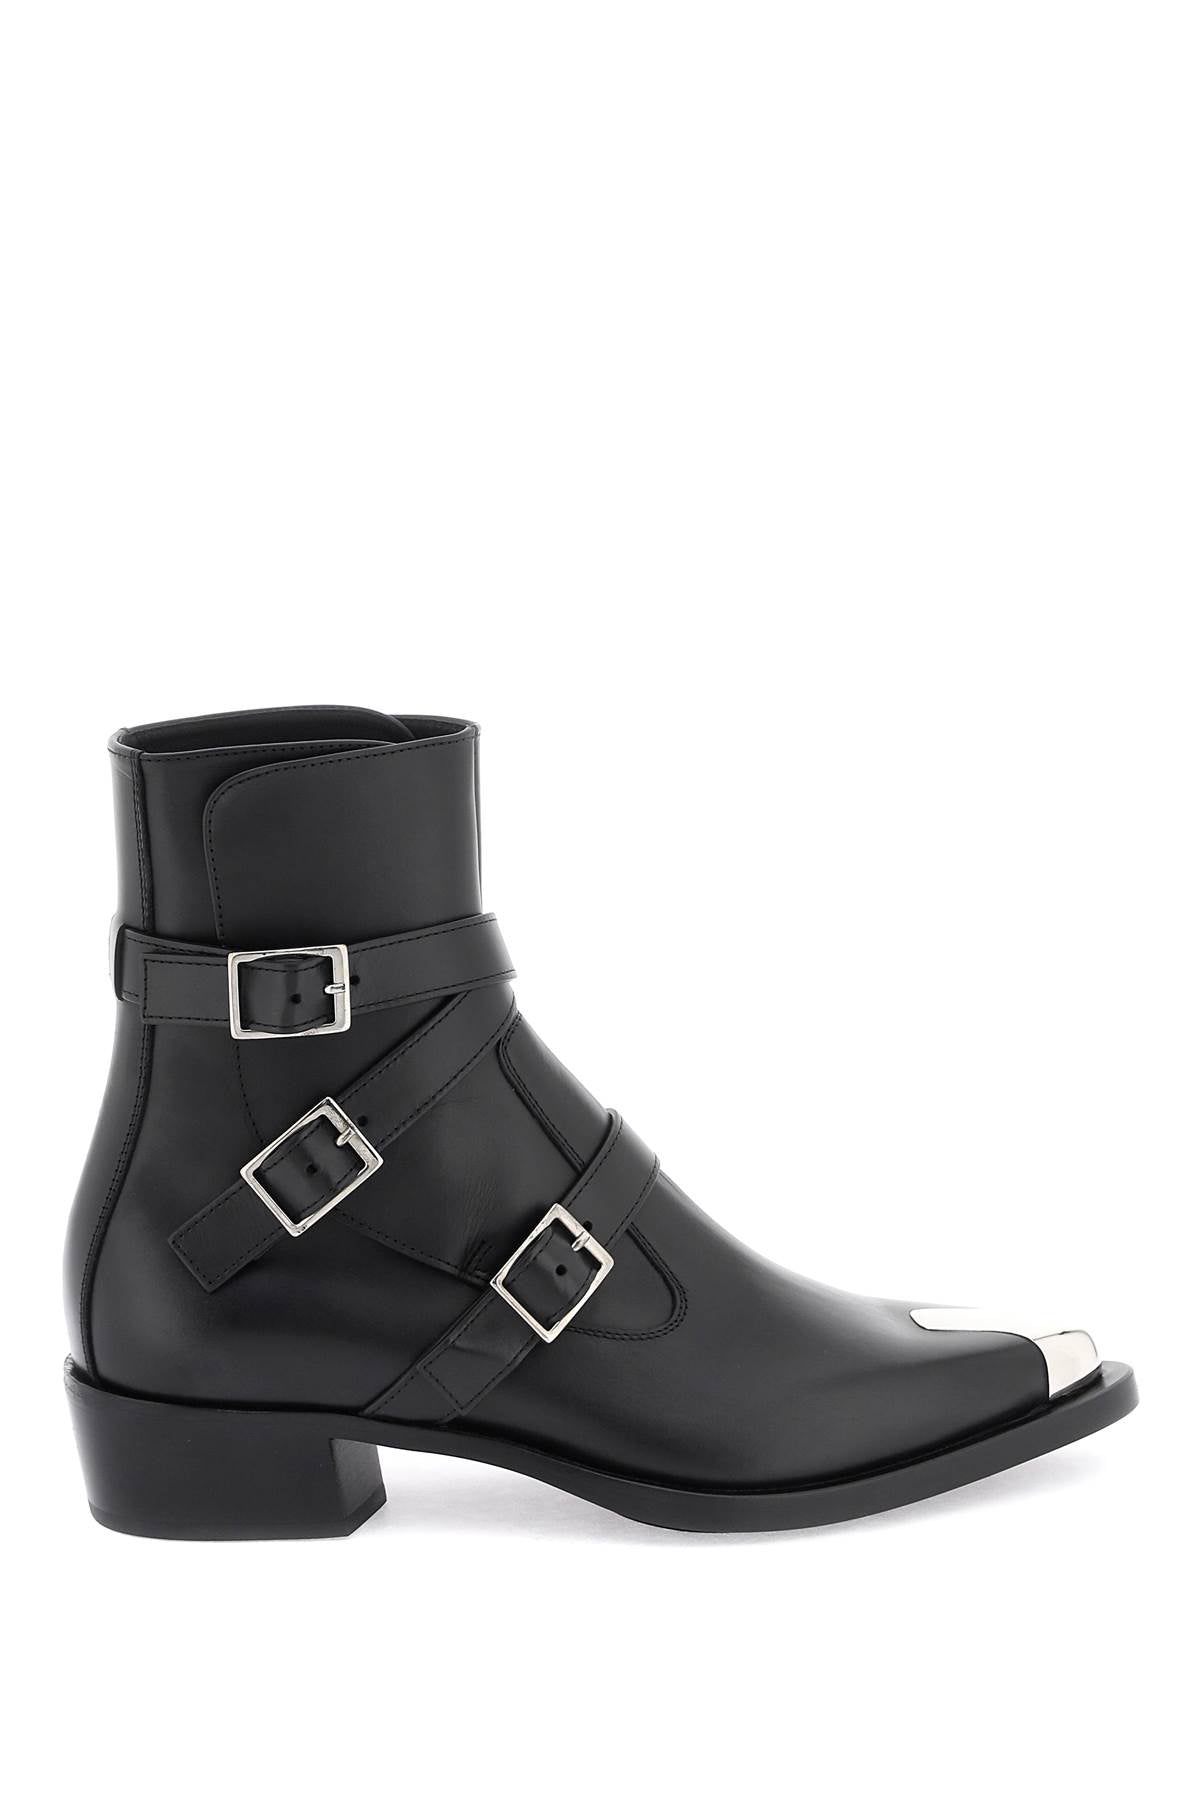 Alexander mcqueen 'punk' boots with three buckles-0